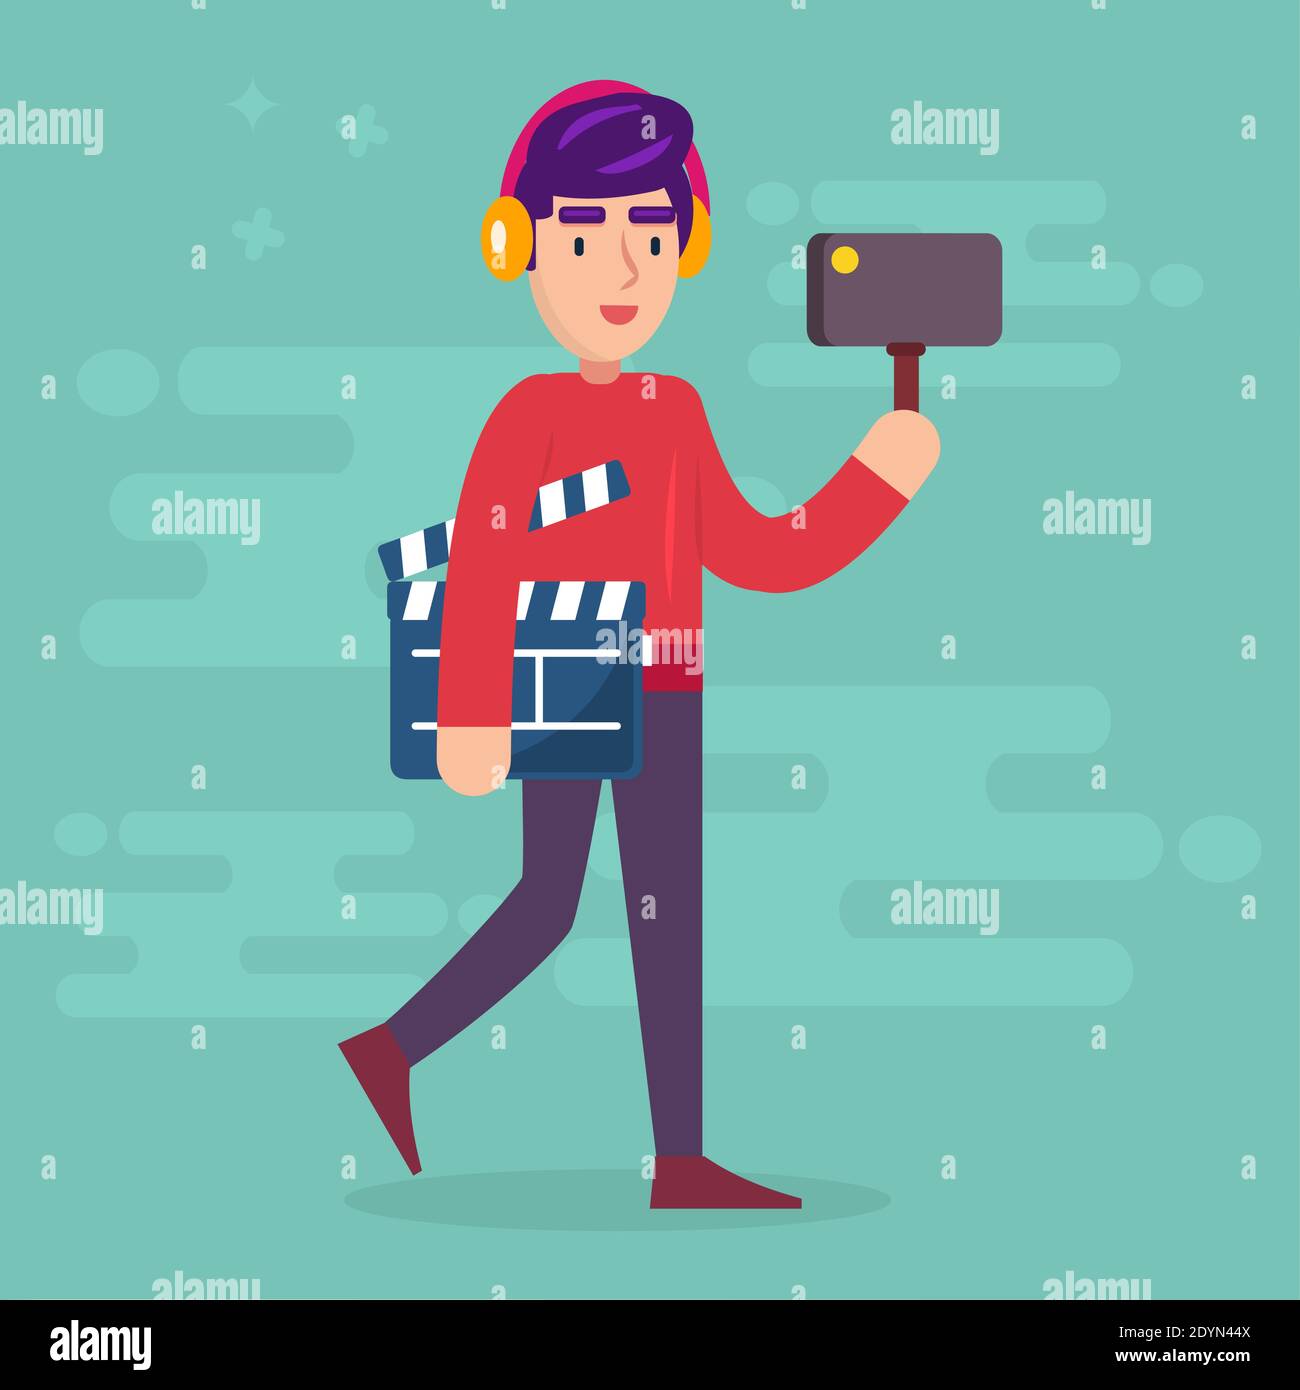 vlog concept vector illustration in flat style Stock Vector